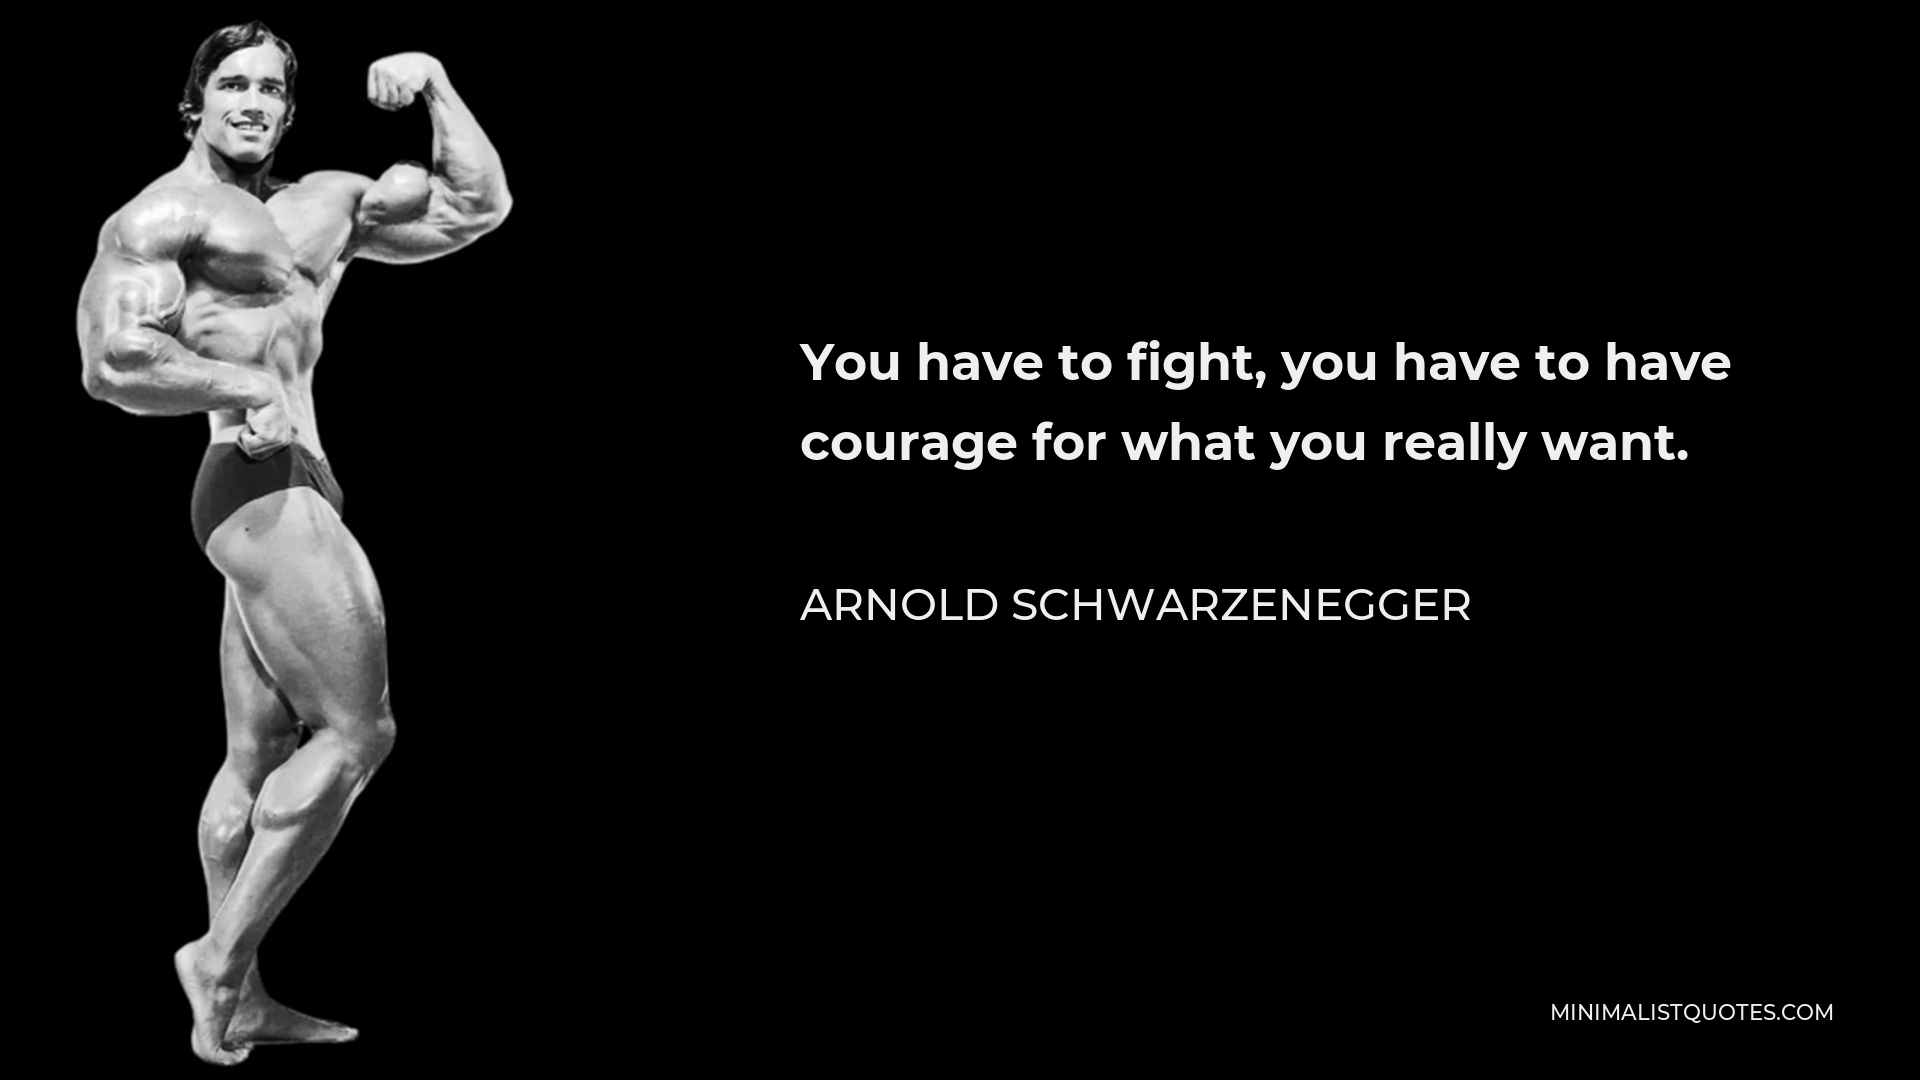 Arnold Schwarzenegger Quote - You have to fight, you have to have courage for what you really want.